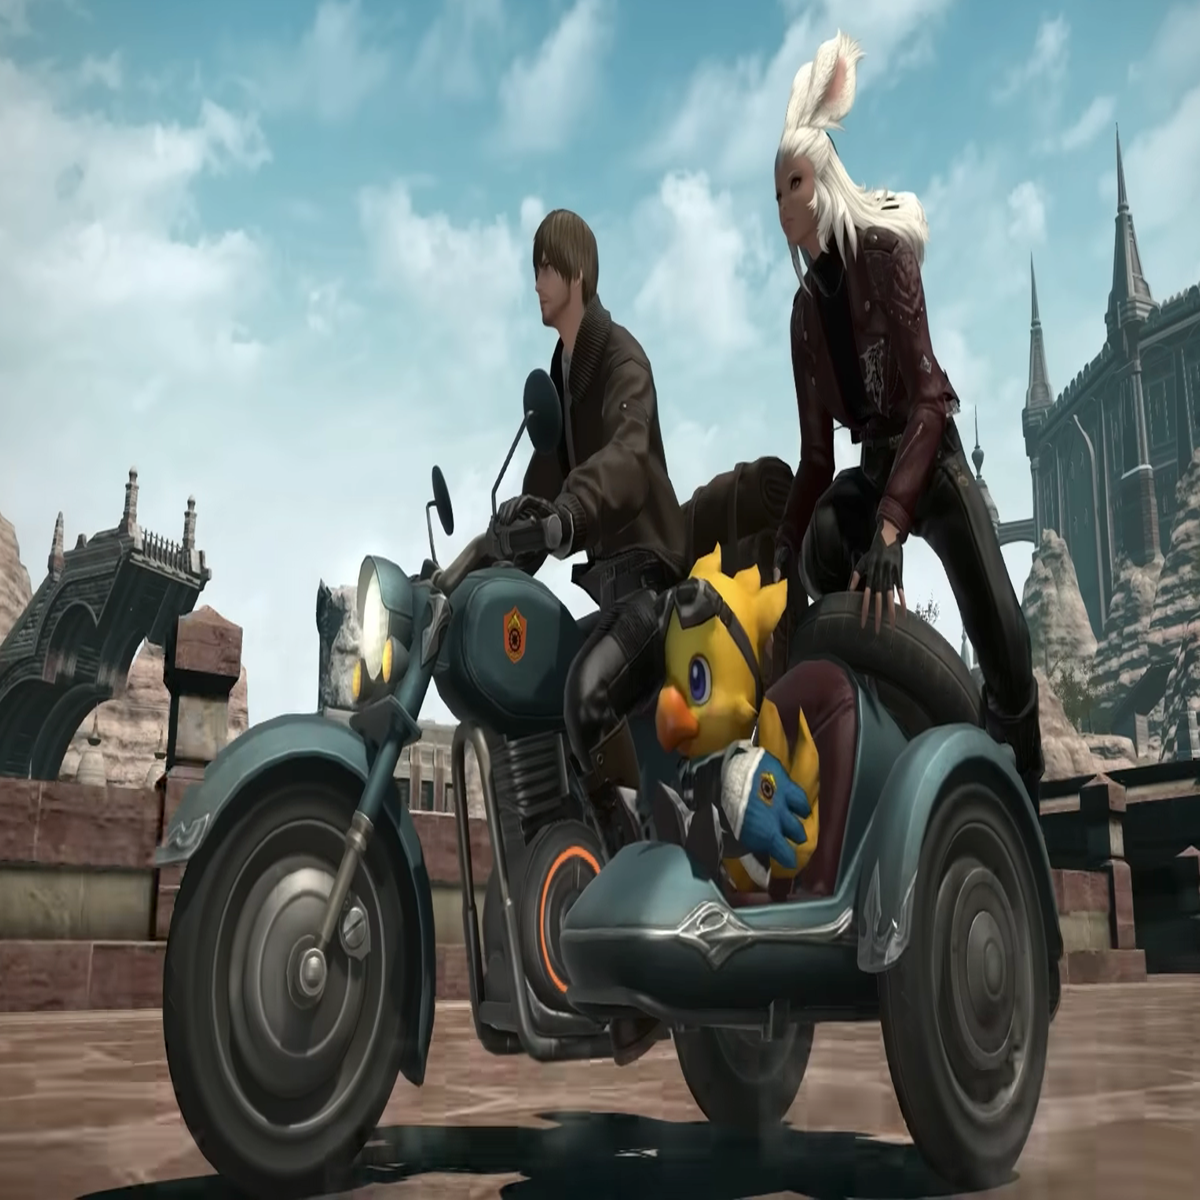 https://assetsio.reedpopcdn.com/final-fantasy-14-motorcycle-sidecar-mount.png?width=1200&height=1200&fit=crop&quality=100&format=png&enable=upscale&auto=webp